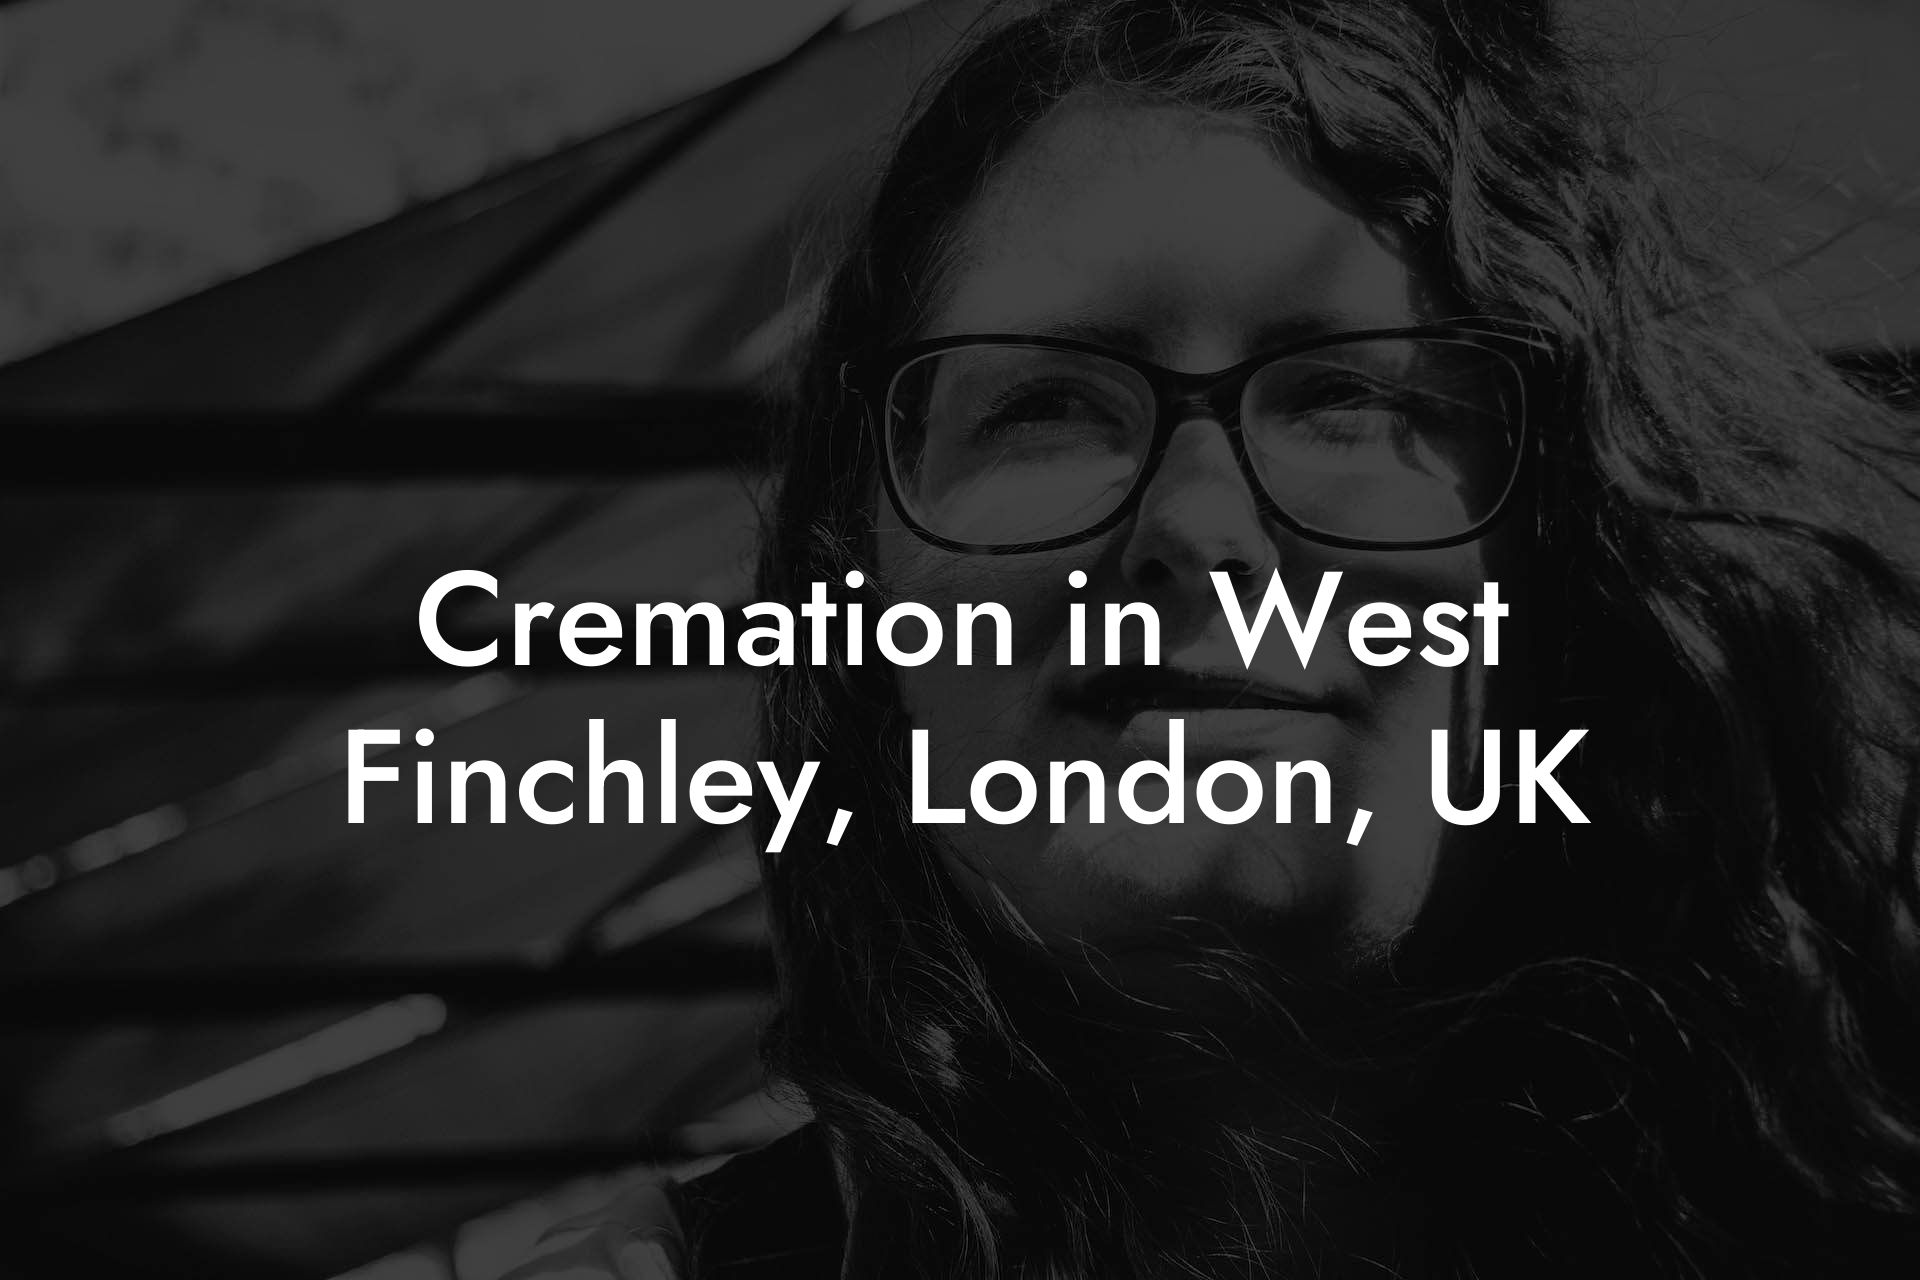 Cremation in West Finchley, London, UK